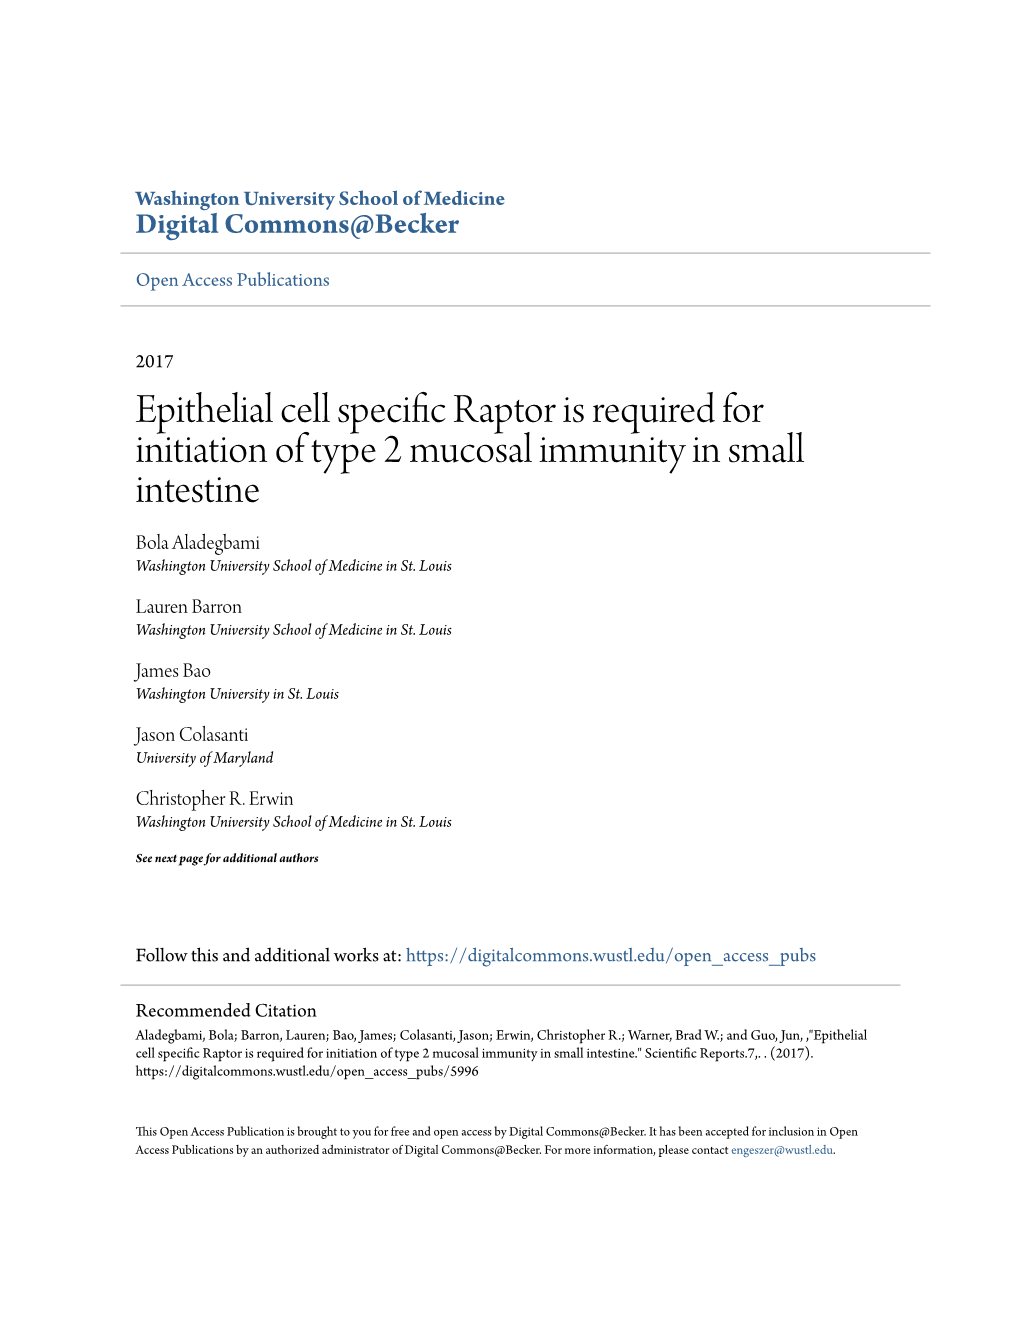 Epithelial Cell Specific Raptor Is Required for Initiation of Type 2